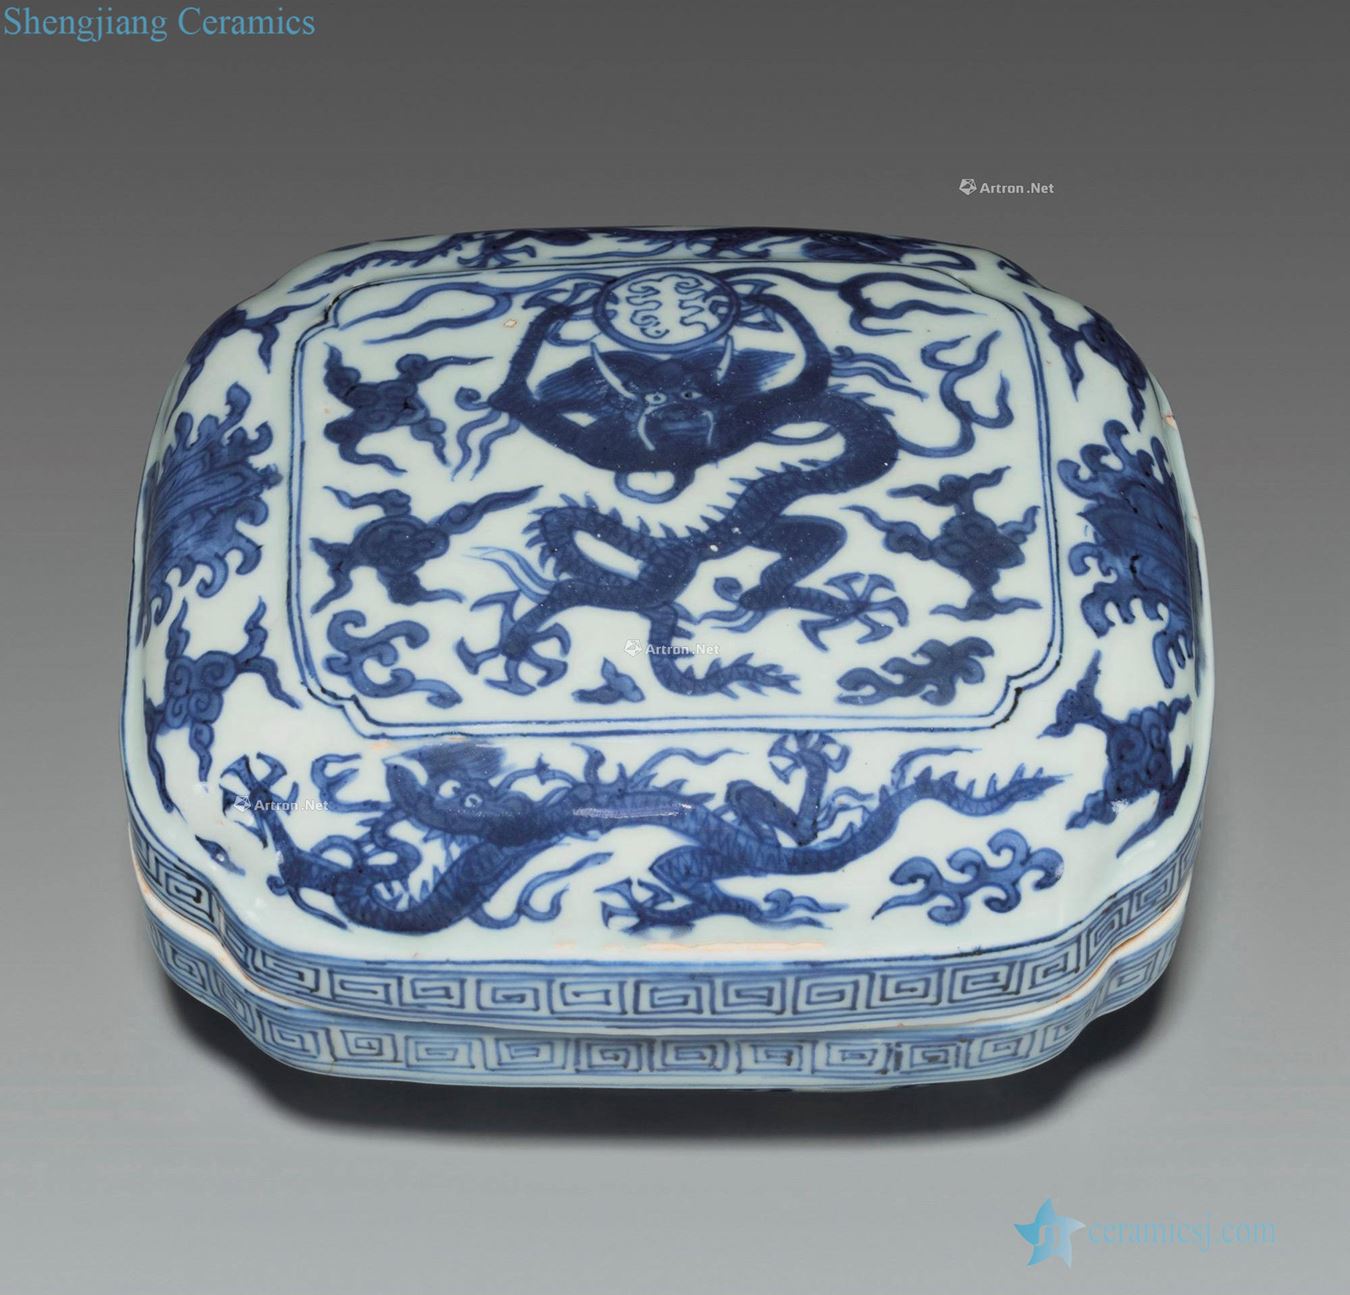 Wanli period (1573-1619), A BLUE AND WHITE as - FORM BOX AND COVER